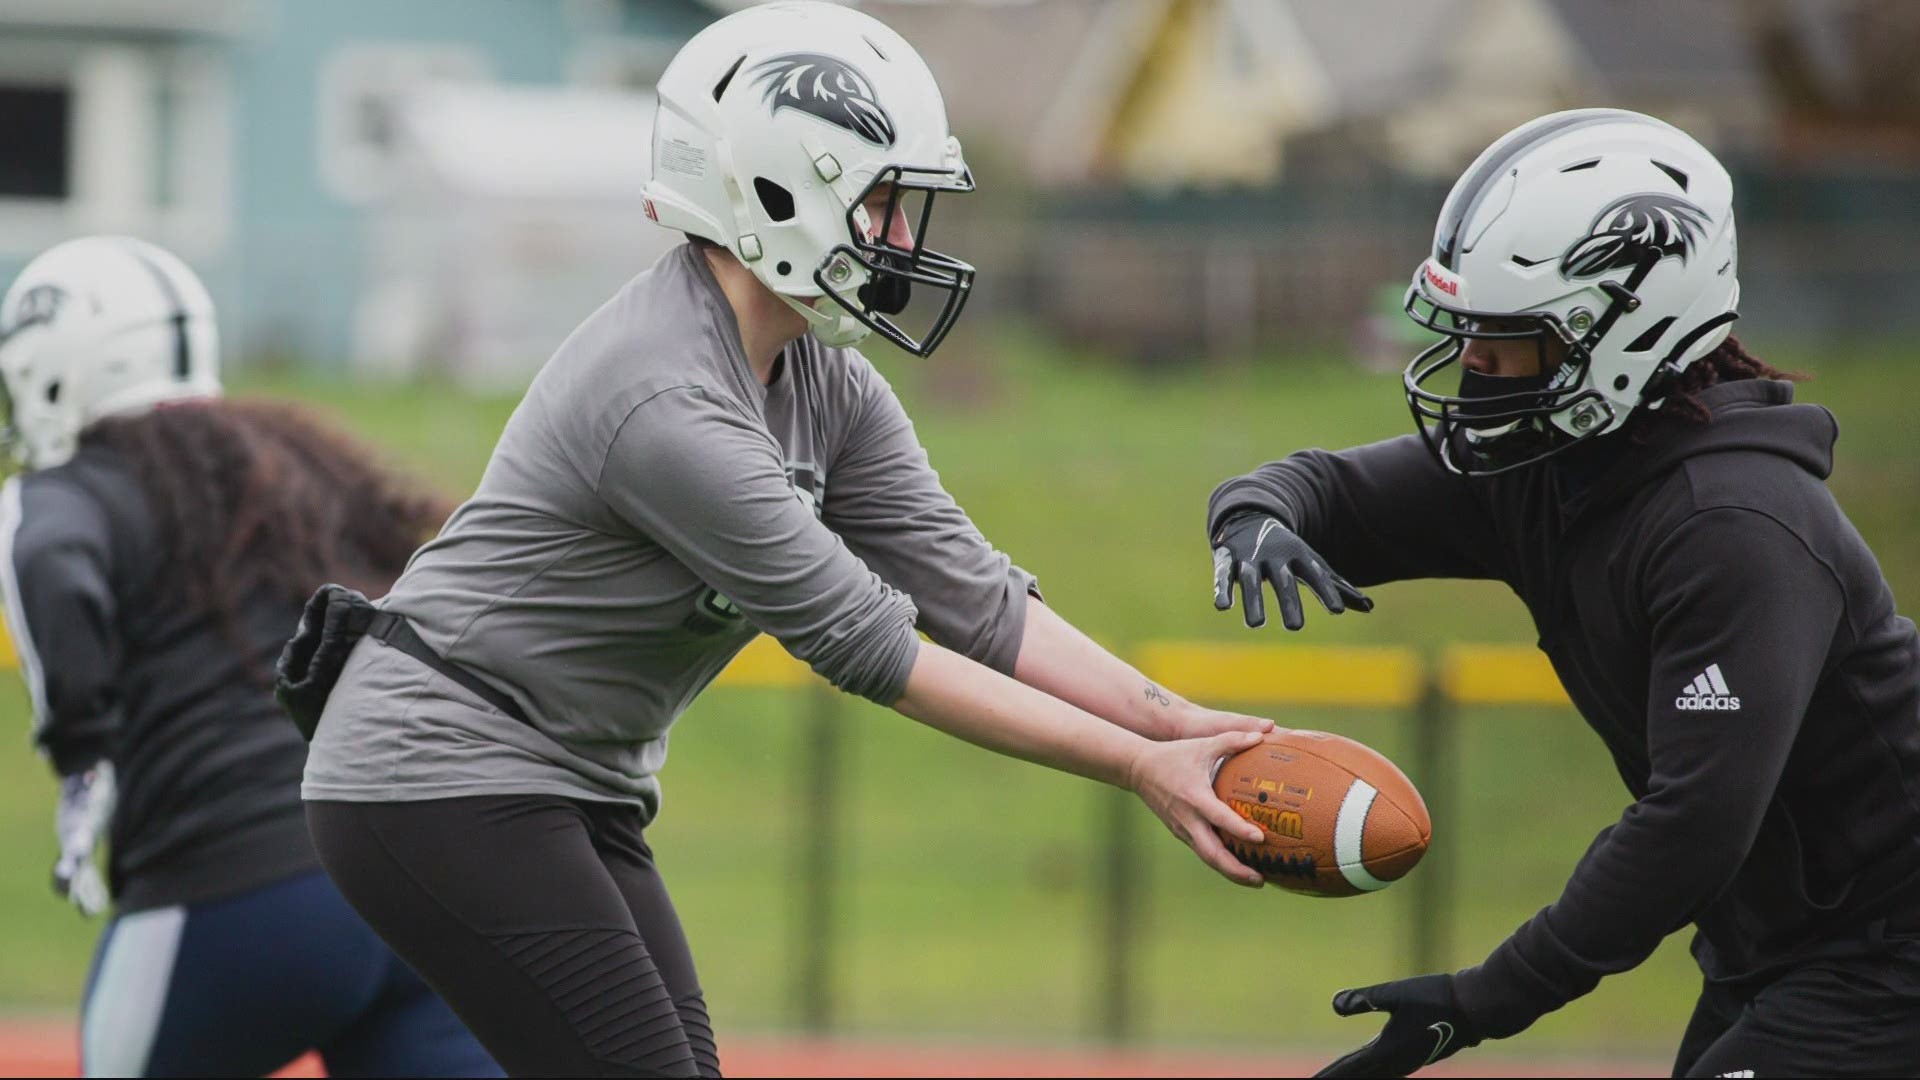 The Oregon Ravens women’s amateur football team is ready for its first season after COVID-19 shut it down last year.